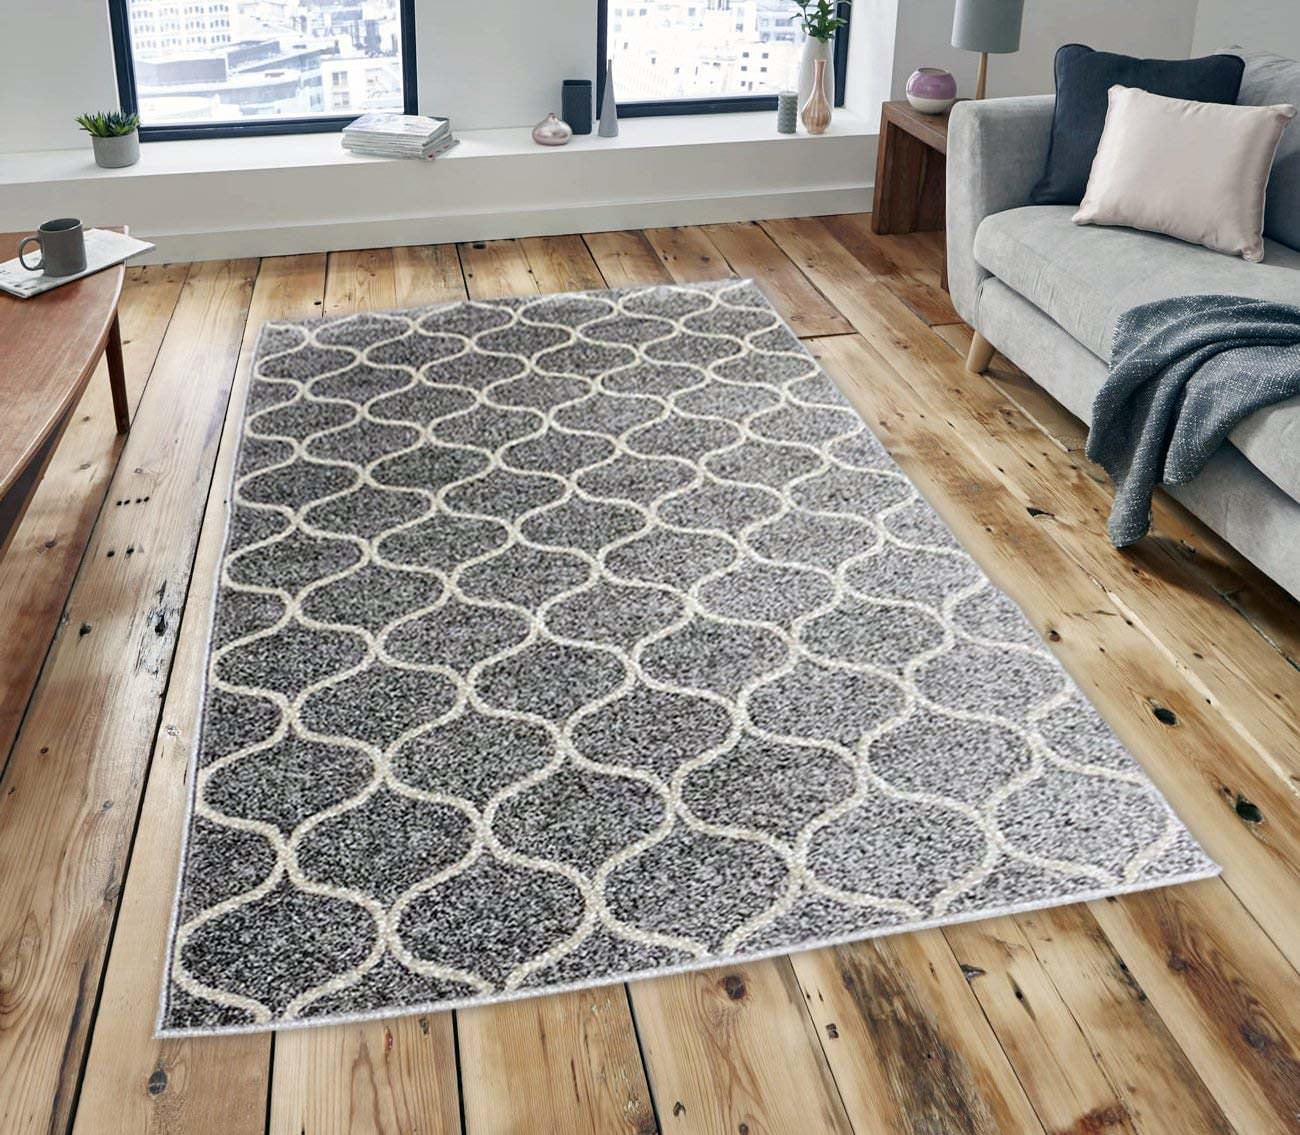 Area Rugs for Living room Area Rugs Clearance 5x7 Runner Rug, Gray Area